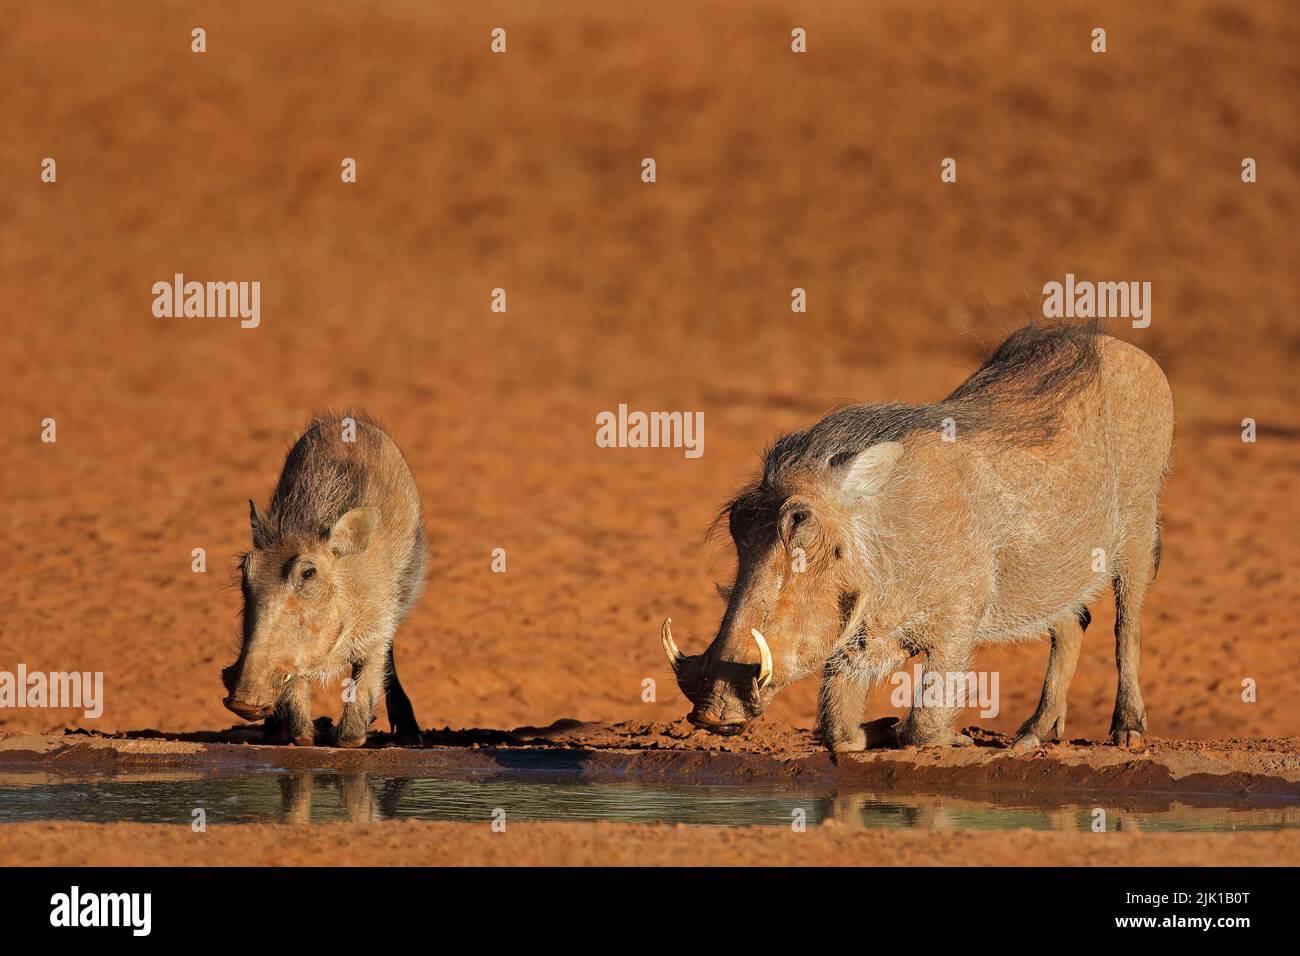 Warthogs (Phacochoerus africanus) drinking at a waterhole, South Africa Stock Photo